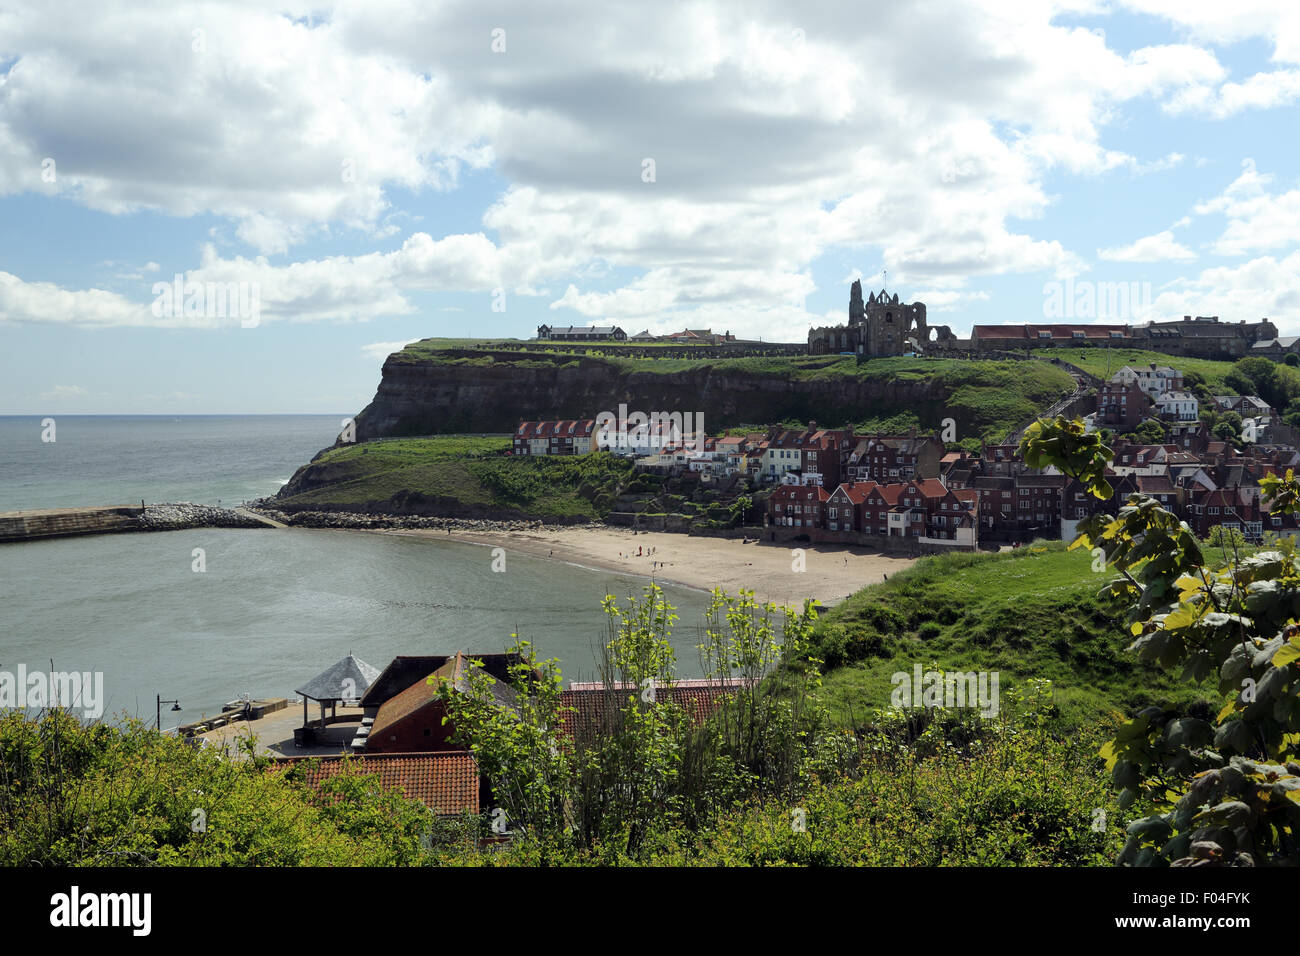 Looking along the beach at Whitby, with the Abbey ruins atop the hill towards the top right of the photo. Stock Photo